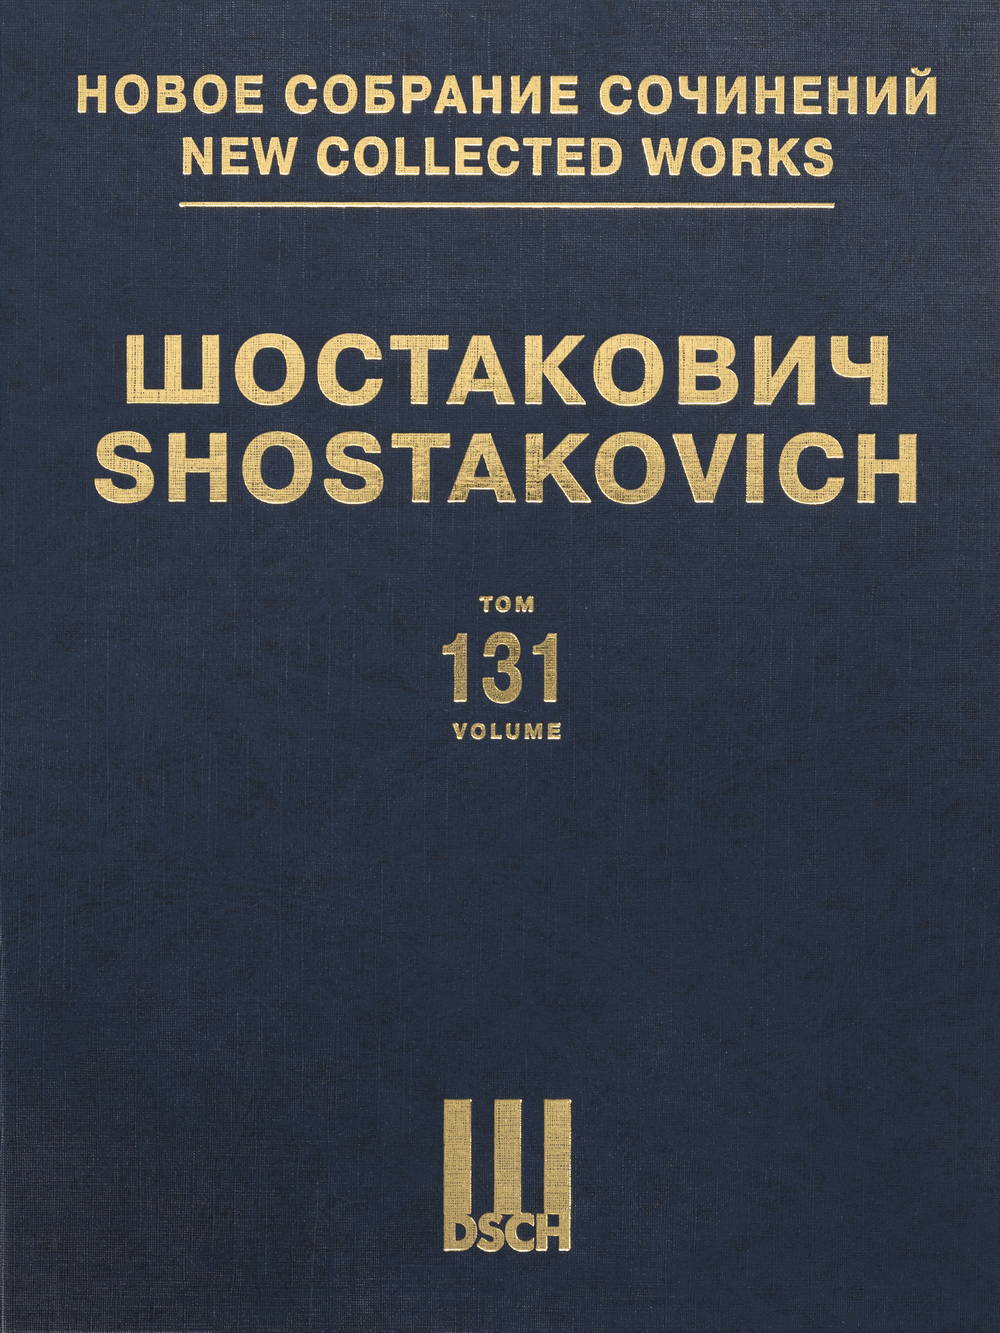 Shostakovich: Simple Folk, Op. 71 and The Young Guard, Op. 75